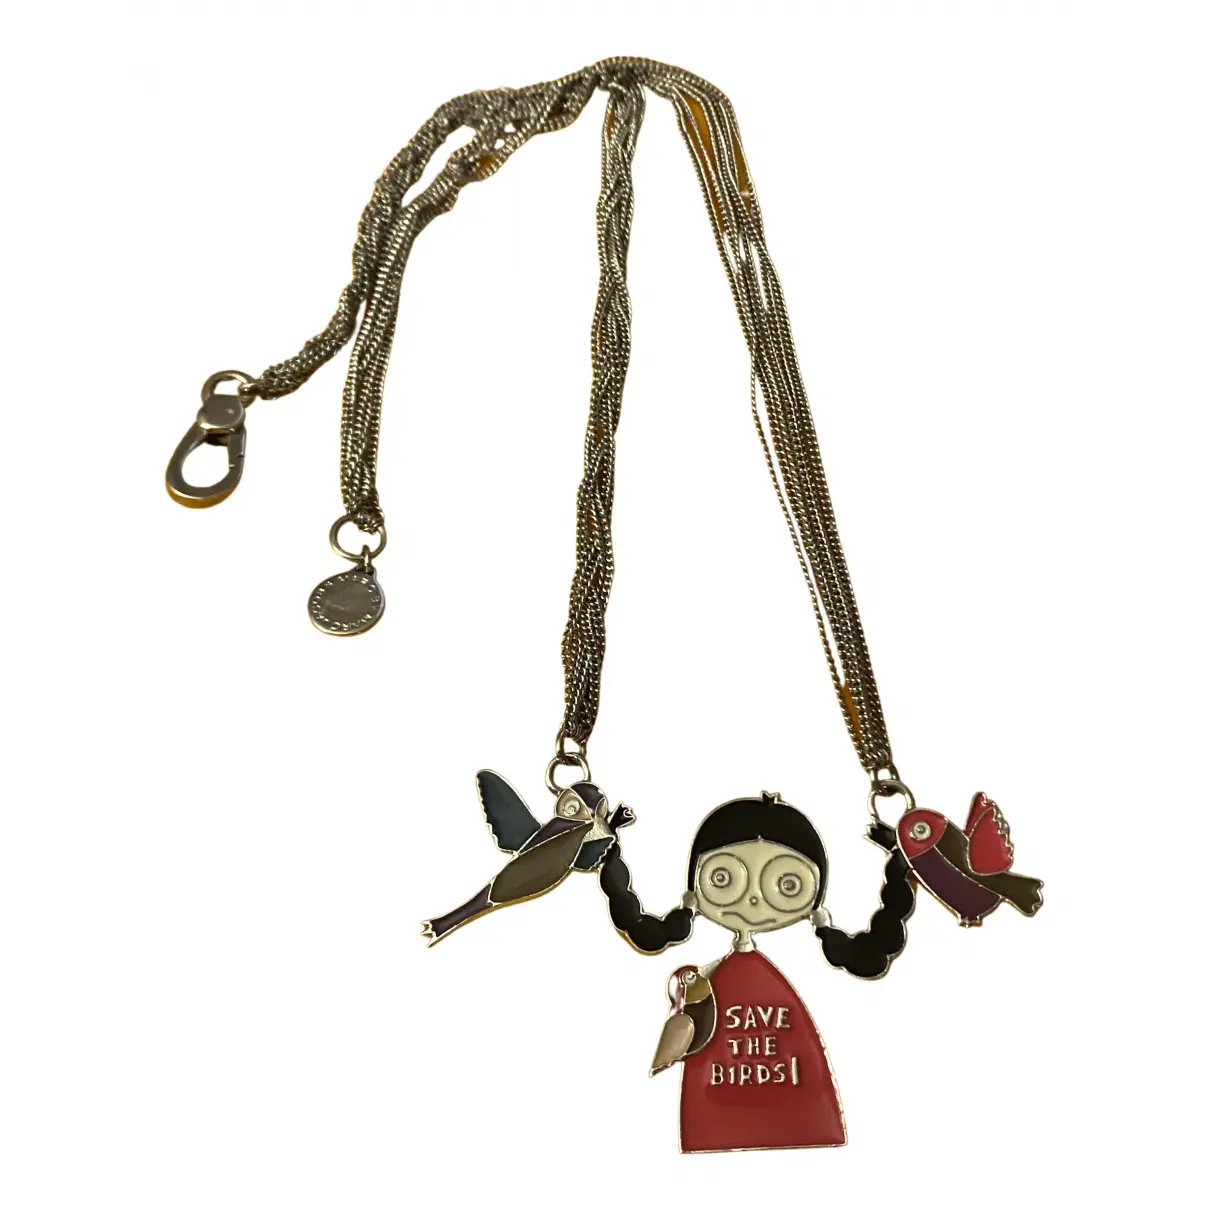 Necklace Marc by Marc Jacobs